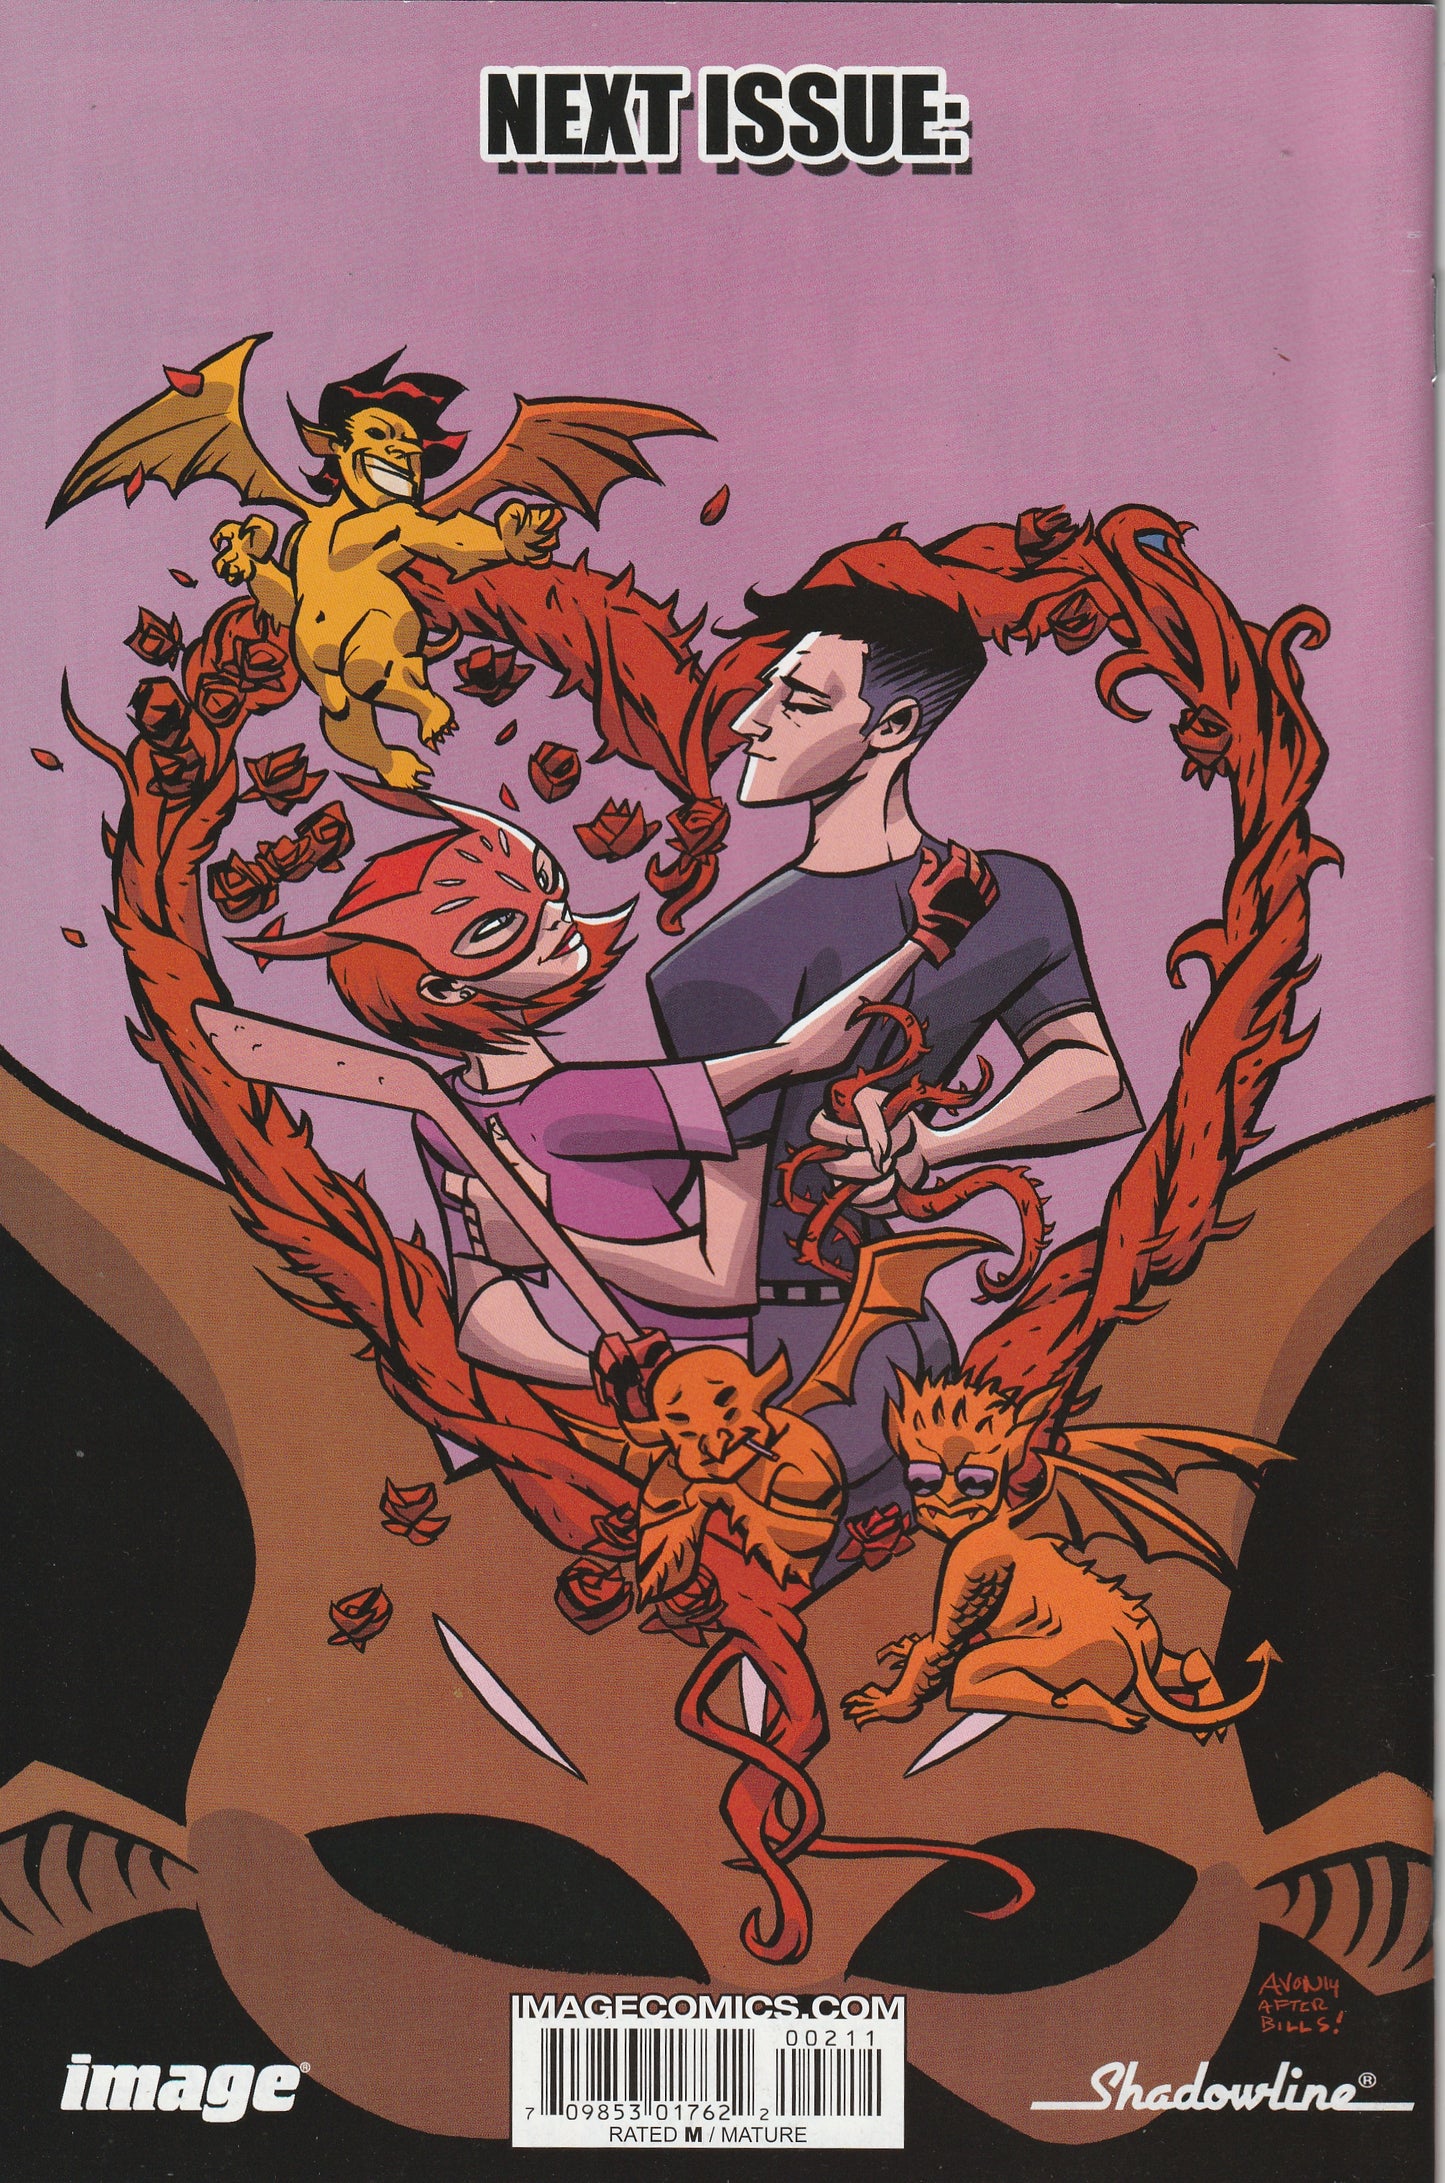 Sinergy #2 (2014) - Cover A by Michael Avon Oeming